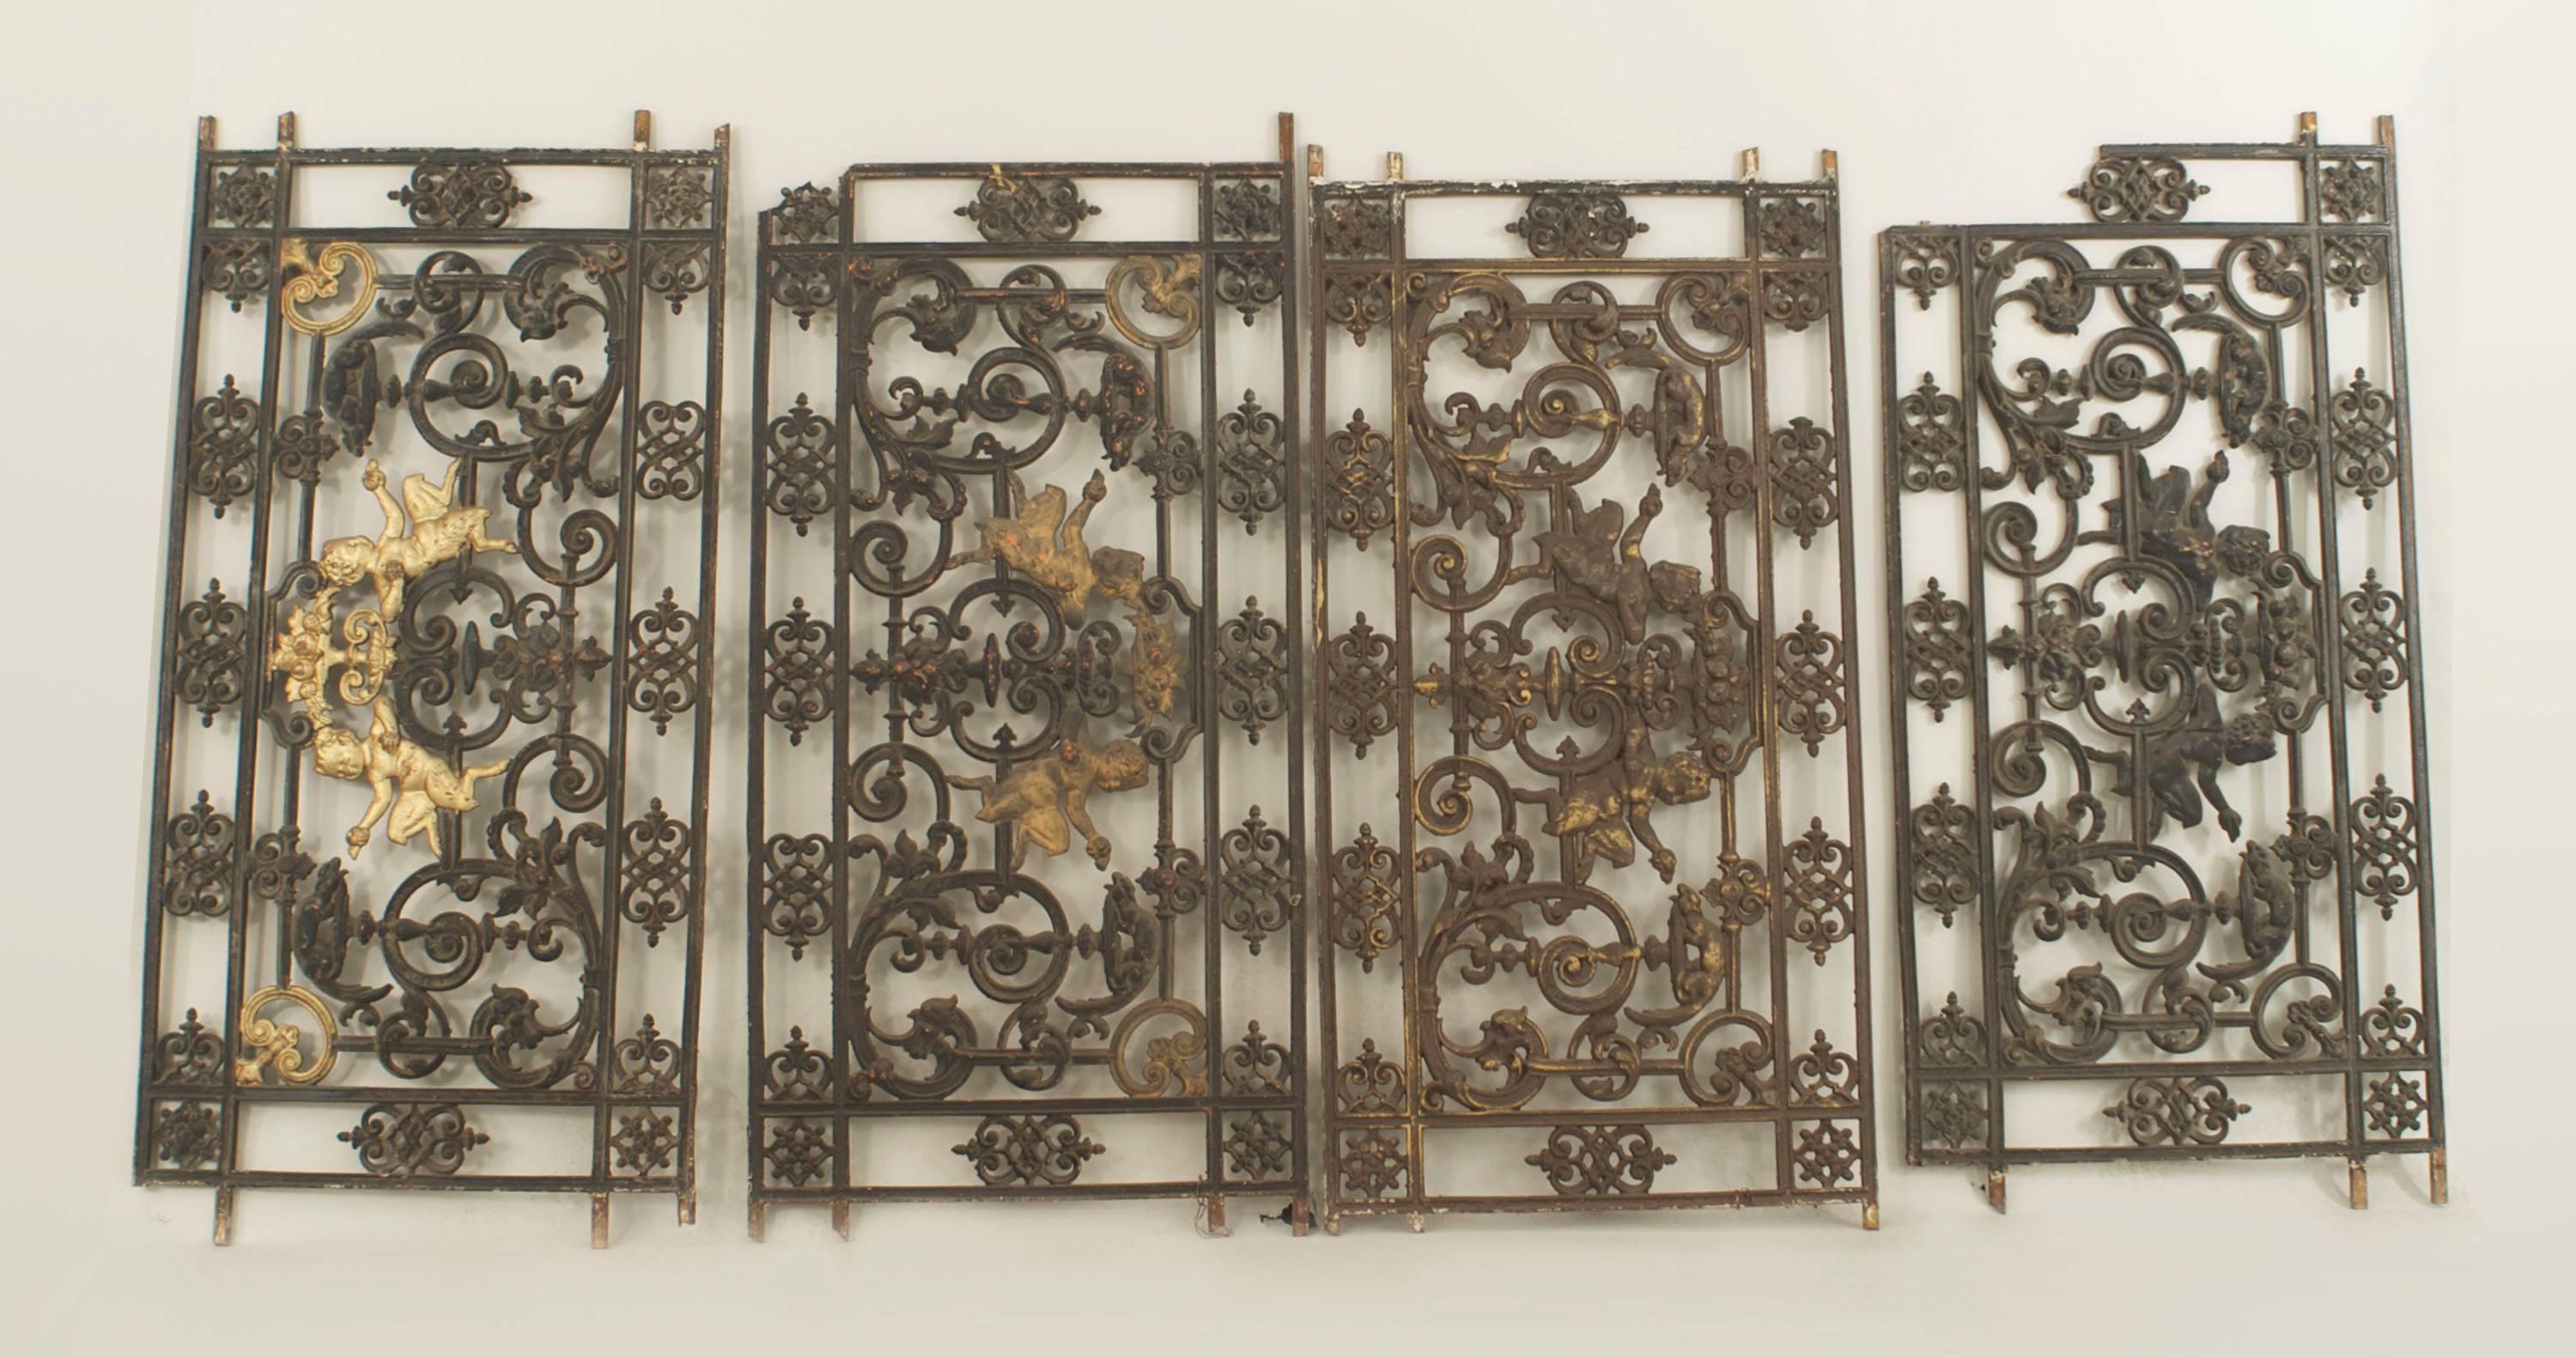 Four 19th century Italian Neoclassical style low iron railings cast with filigree and putti designs. 
(priced each)